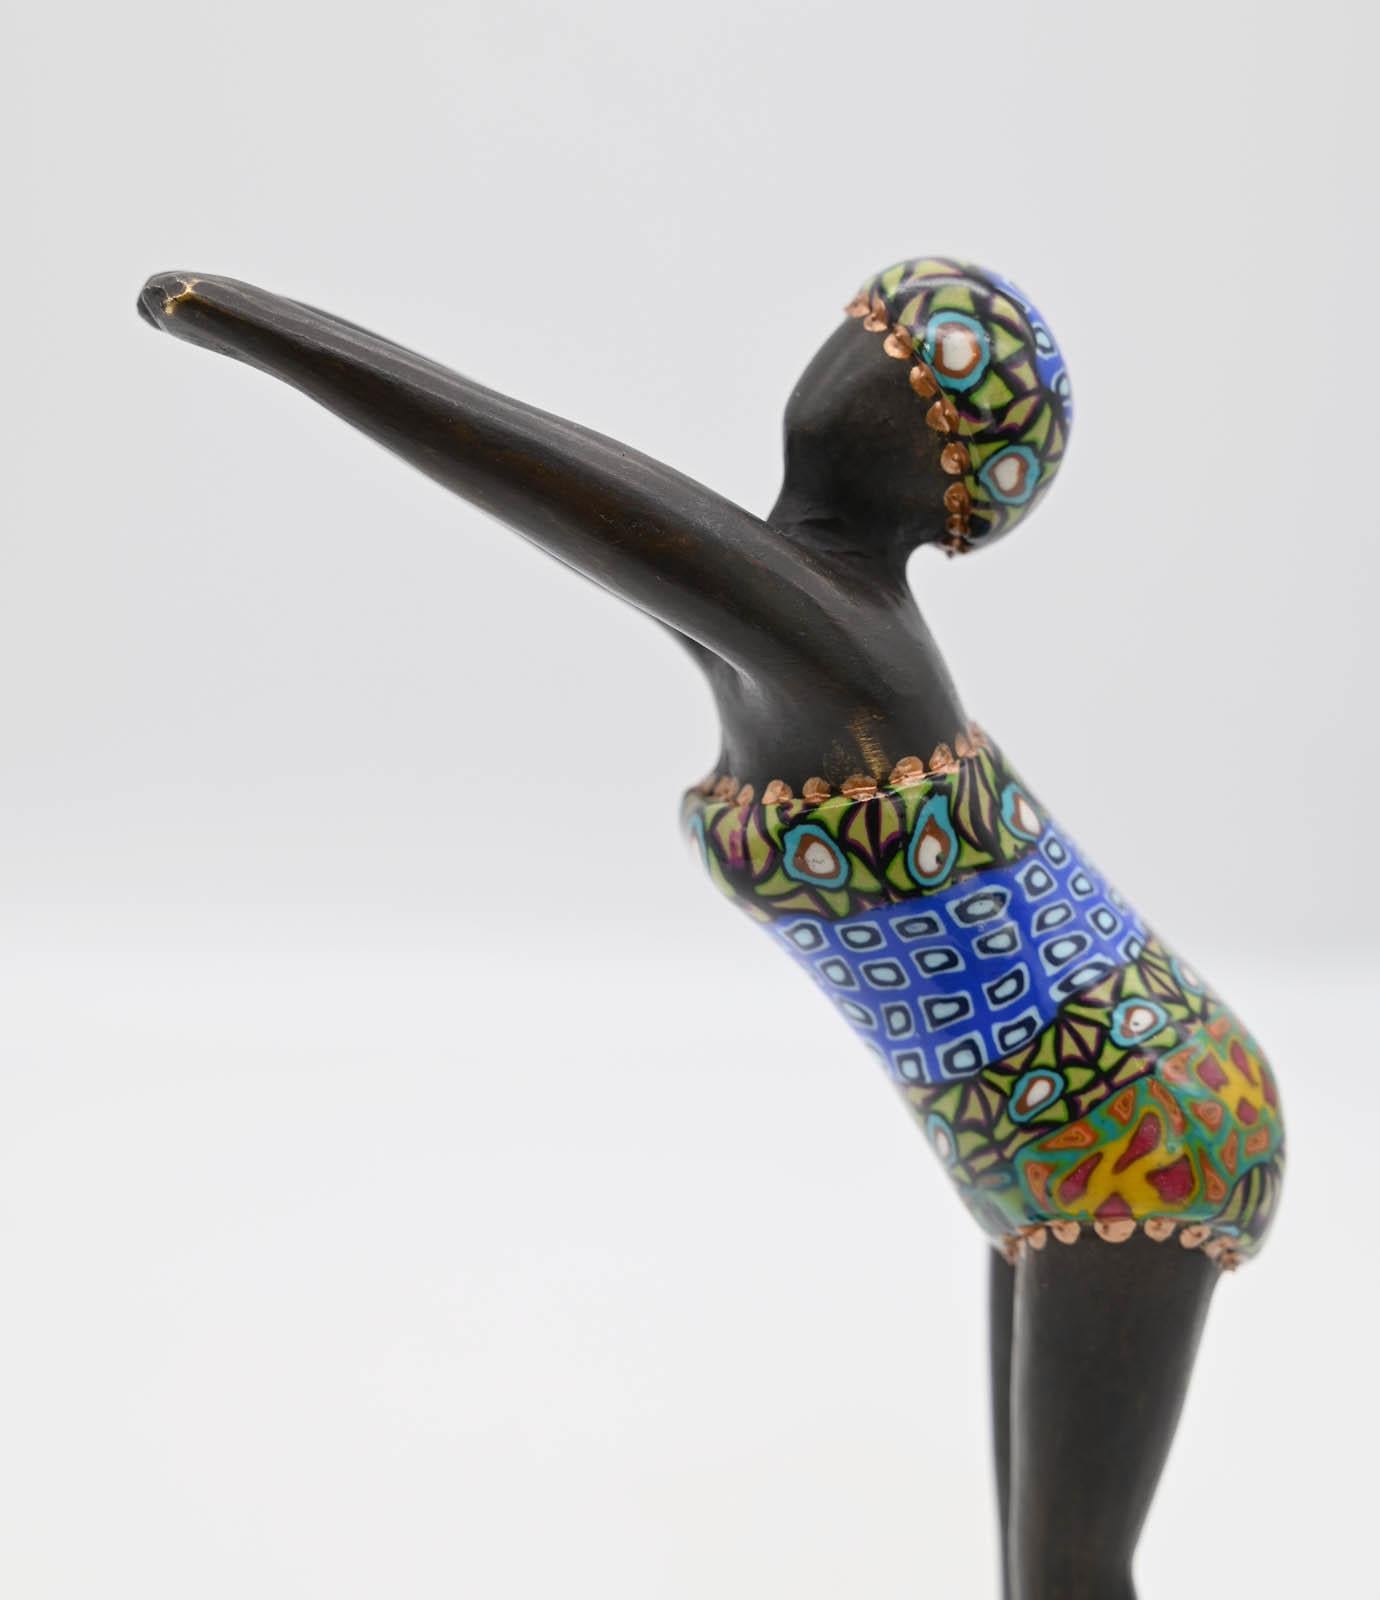 Original bronze and Millefiori
Unique piece
Height: 19 cm, 7,48 in 
 Width: 11 cm, 4,33 in
Signed on the base.

Work sold with invoice and certificate of authenticity
Fast shipping in a secure box with insurance.

Yannick LE BLOAS (born in